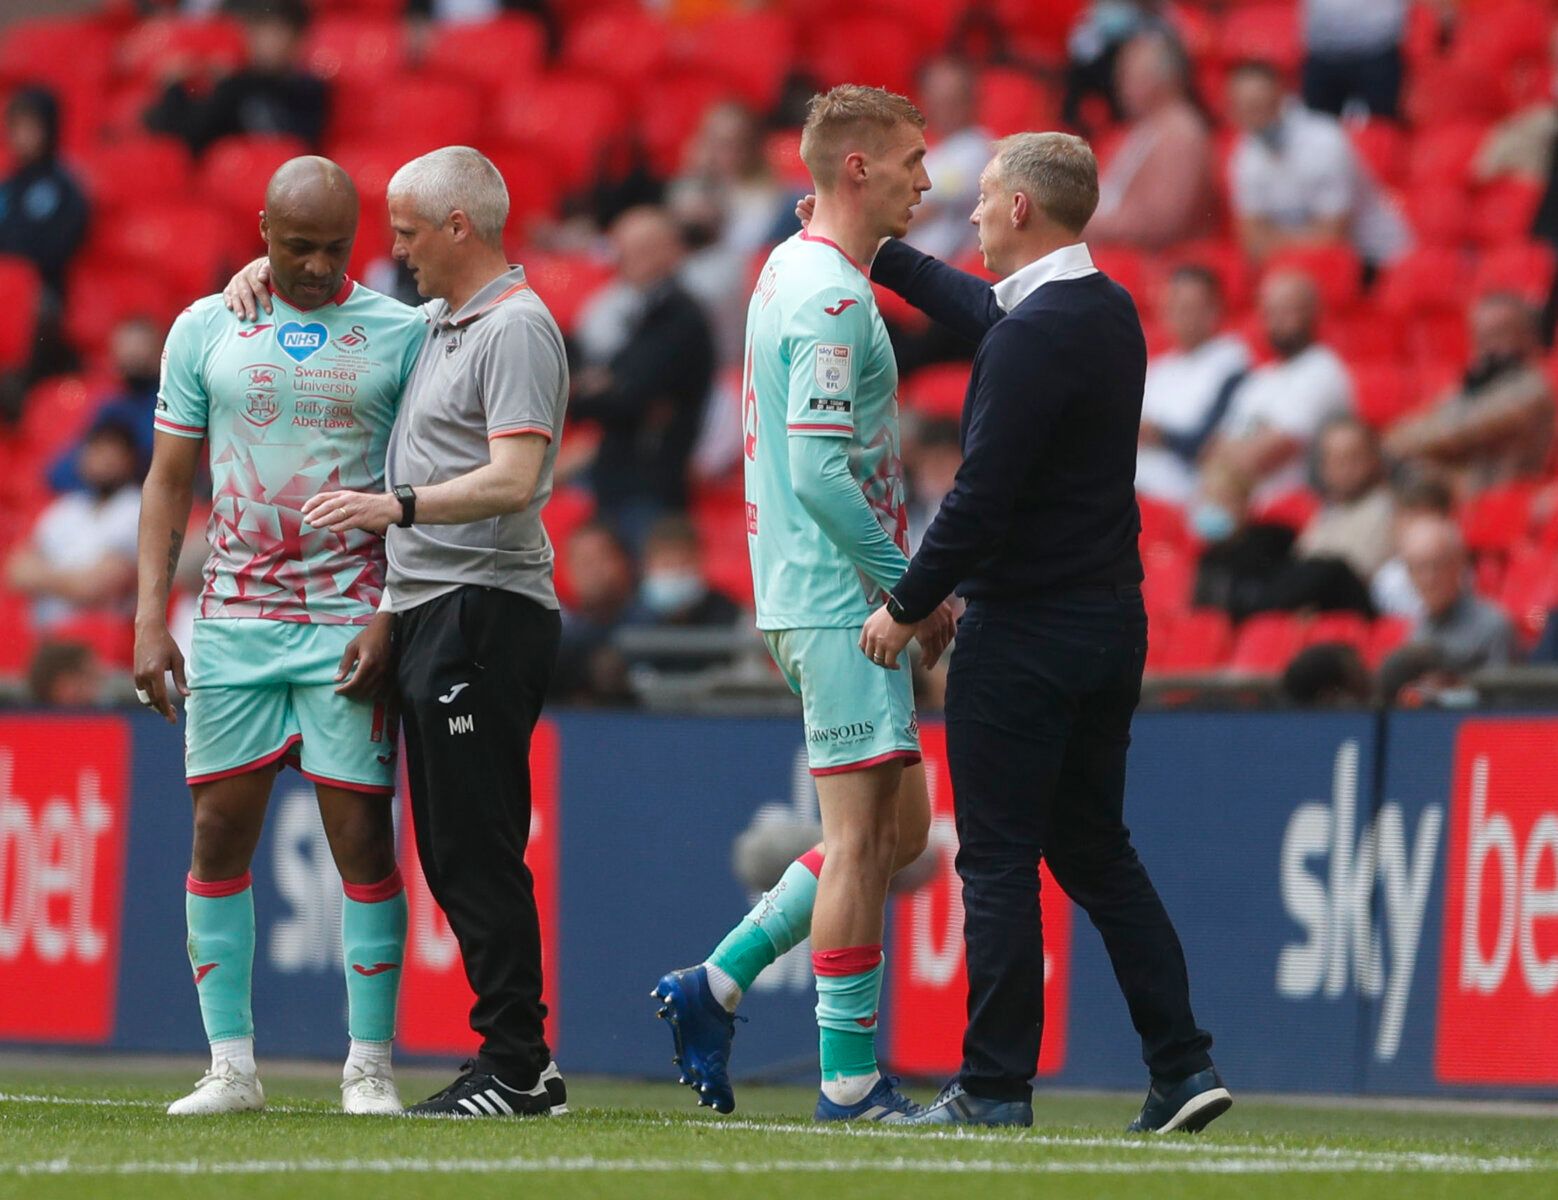 Soccer Football - Championship Play-Off Final - Brentford v Swansea City - Wembley Stadium, London, Britain - May 29, 2021 Swansea City's Jay Fulton walks off the pitch after being sent off Action Images via Reuters/Matthew Childs